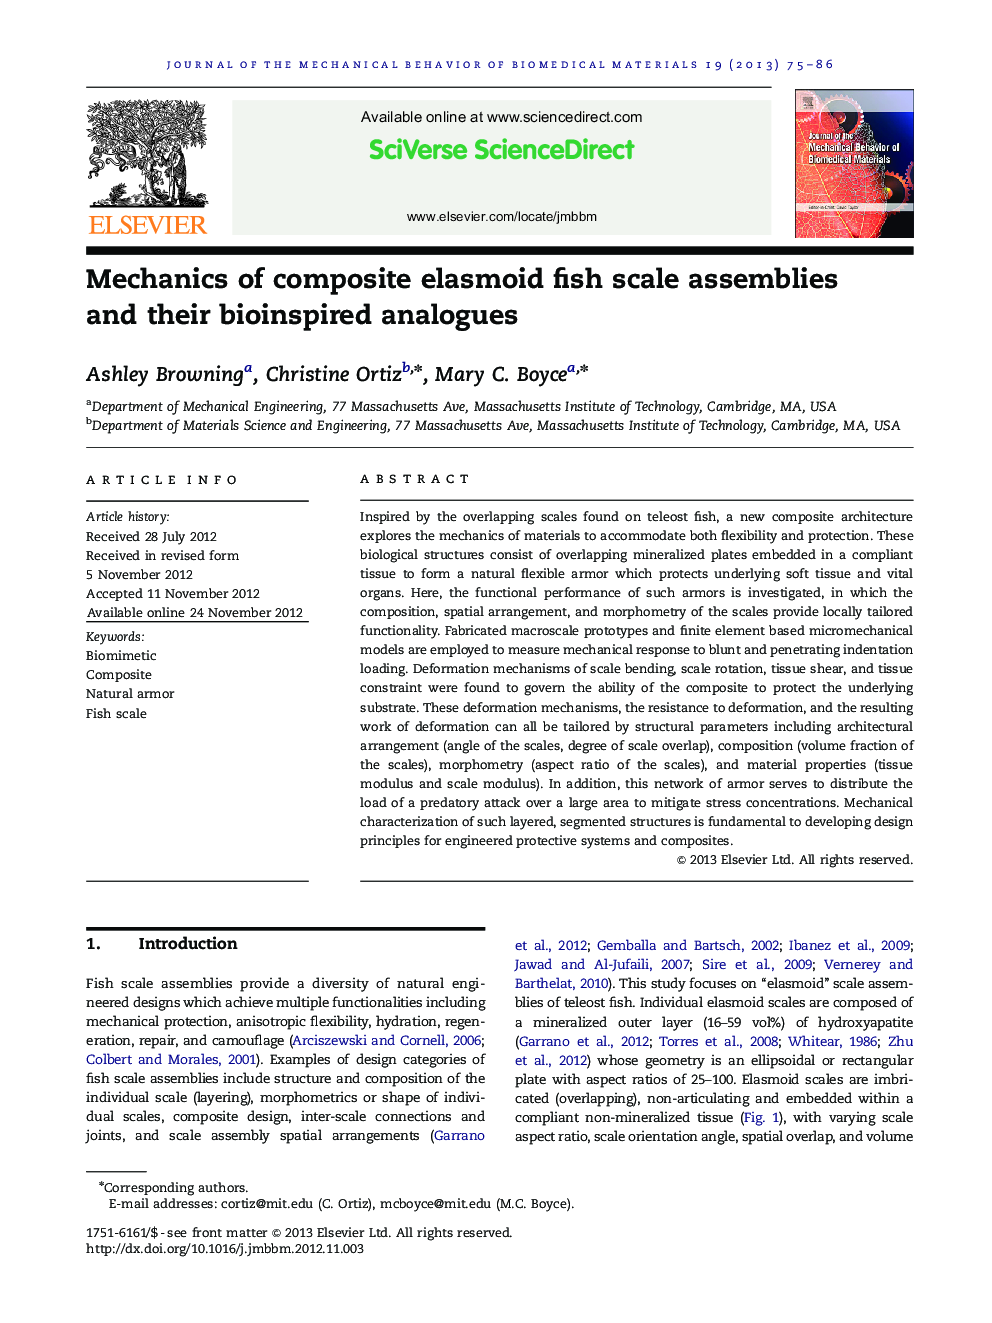 Mechanics of composite elasmoid fish scale assemblies and their bioinspired analogues